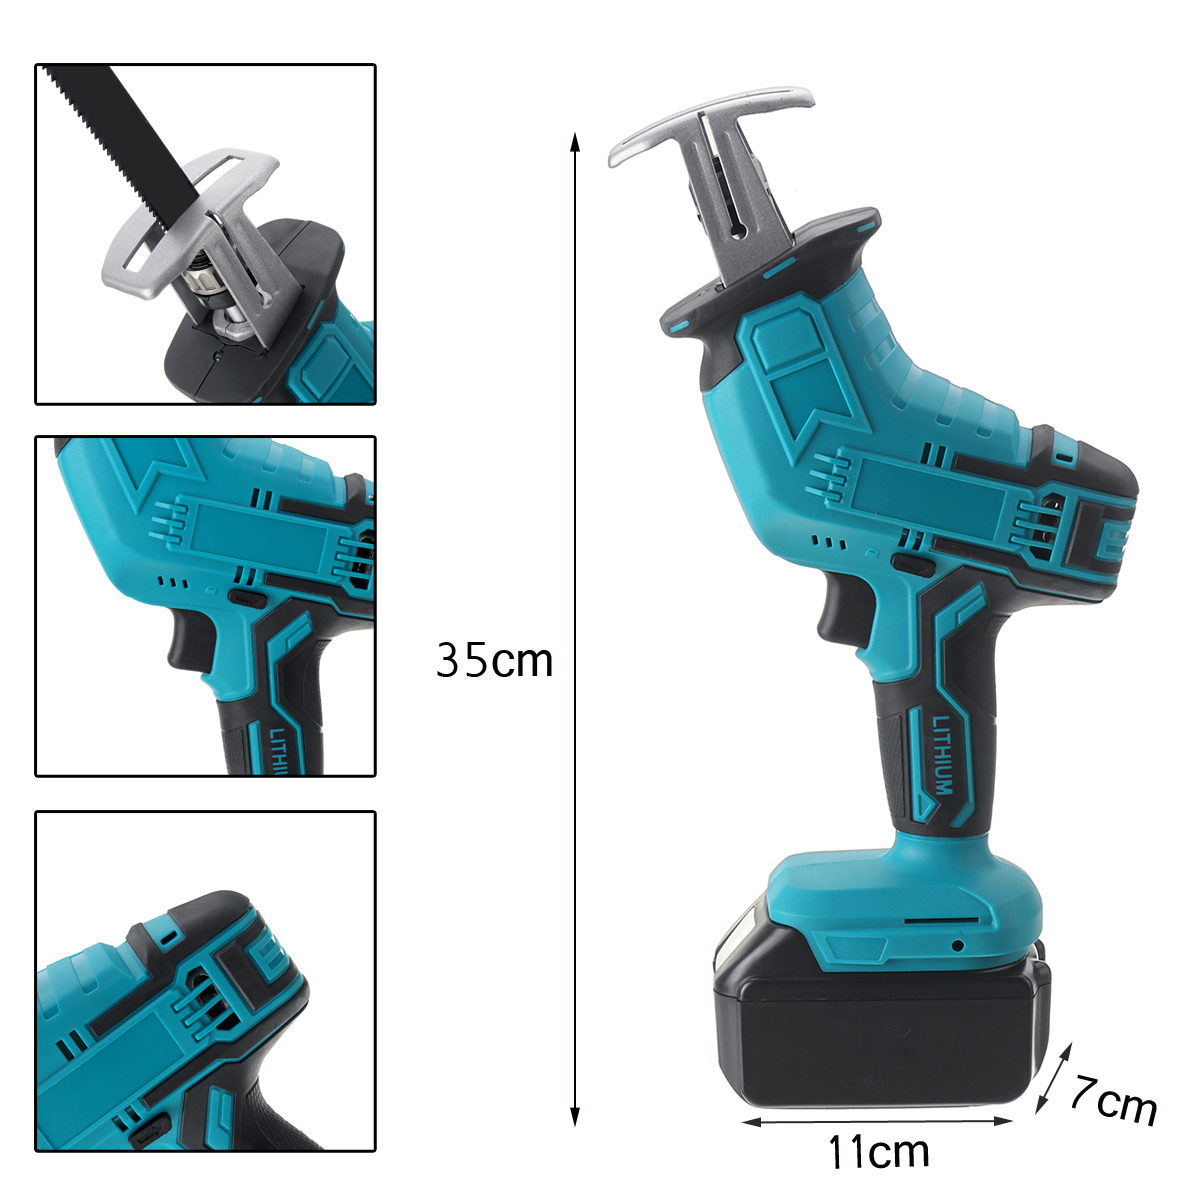 68V-Electric-Reciprocating-Saw-Outdoor-Woodworking-Cordless-Handheld-Saw-9000mah-1683596-12